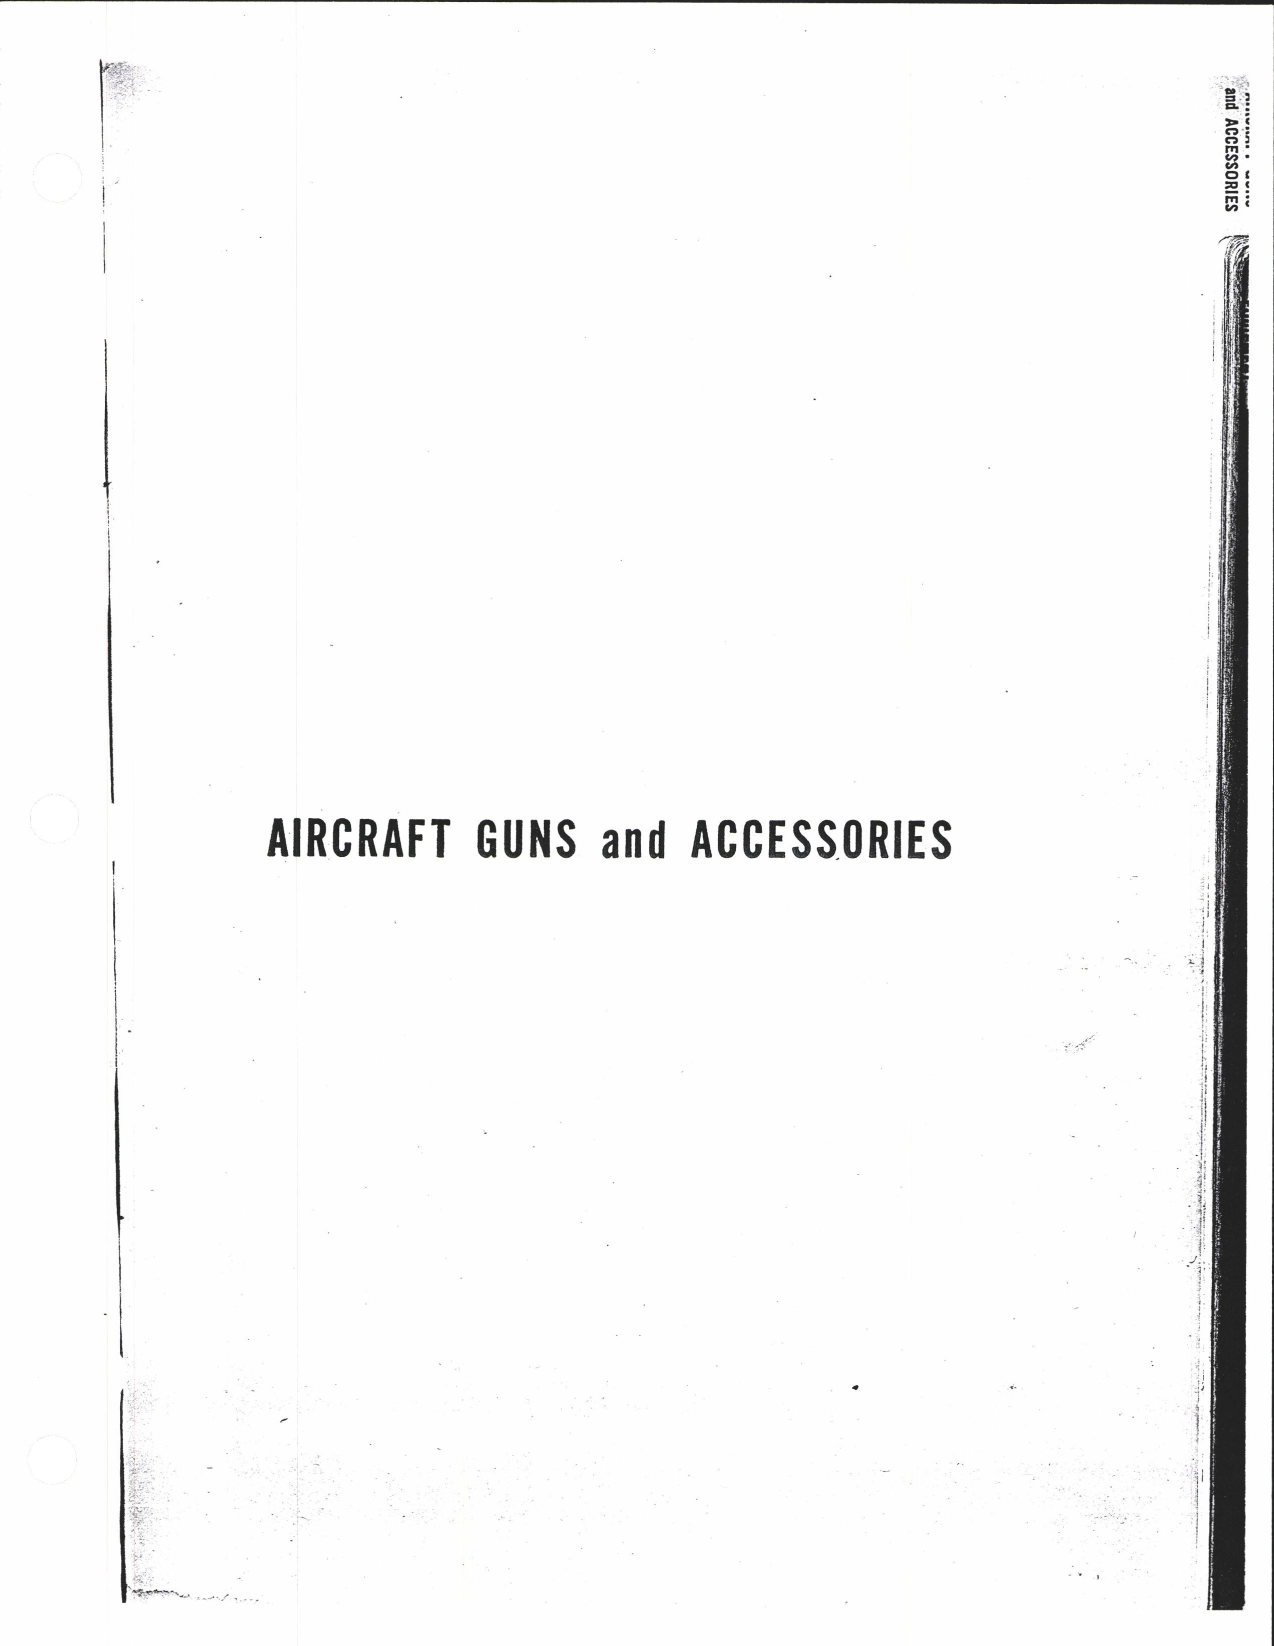 Sample page 7 from AirCorps Library document: Aviation Ordnance Equipment Catalogue for Aircraft Guns and Accessories